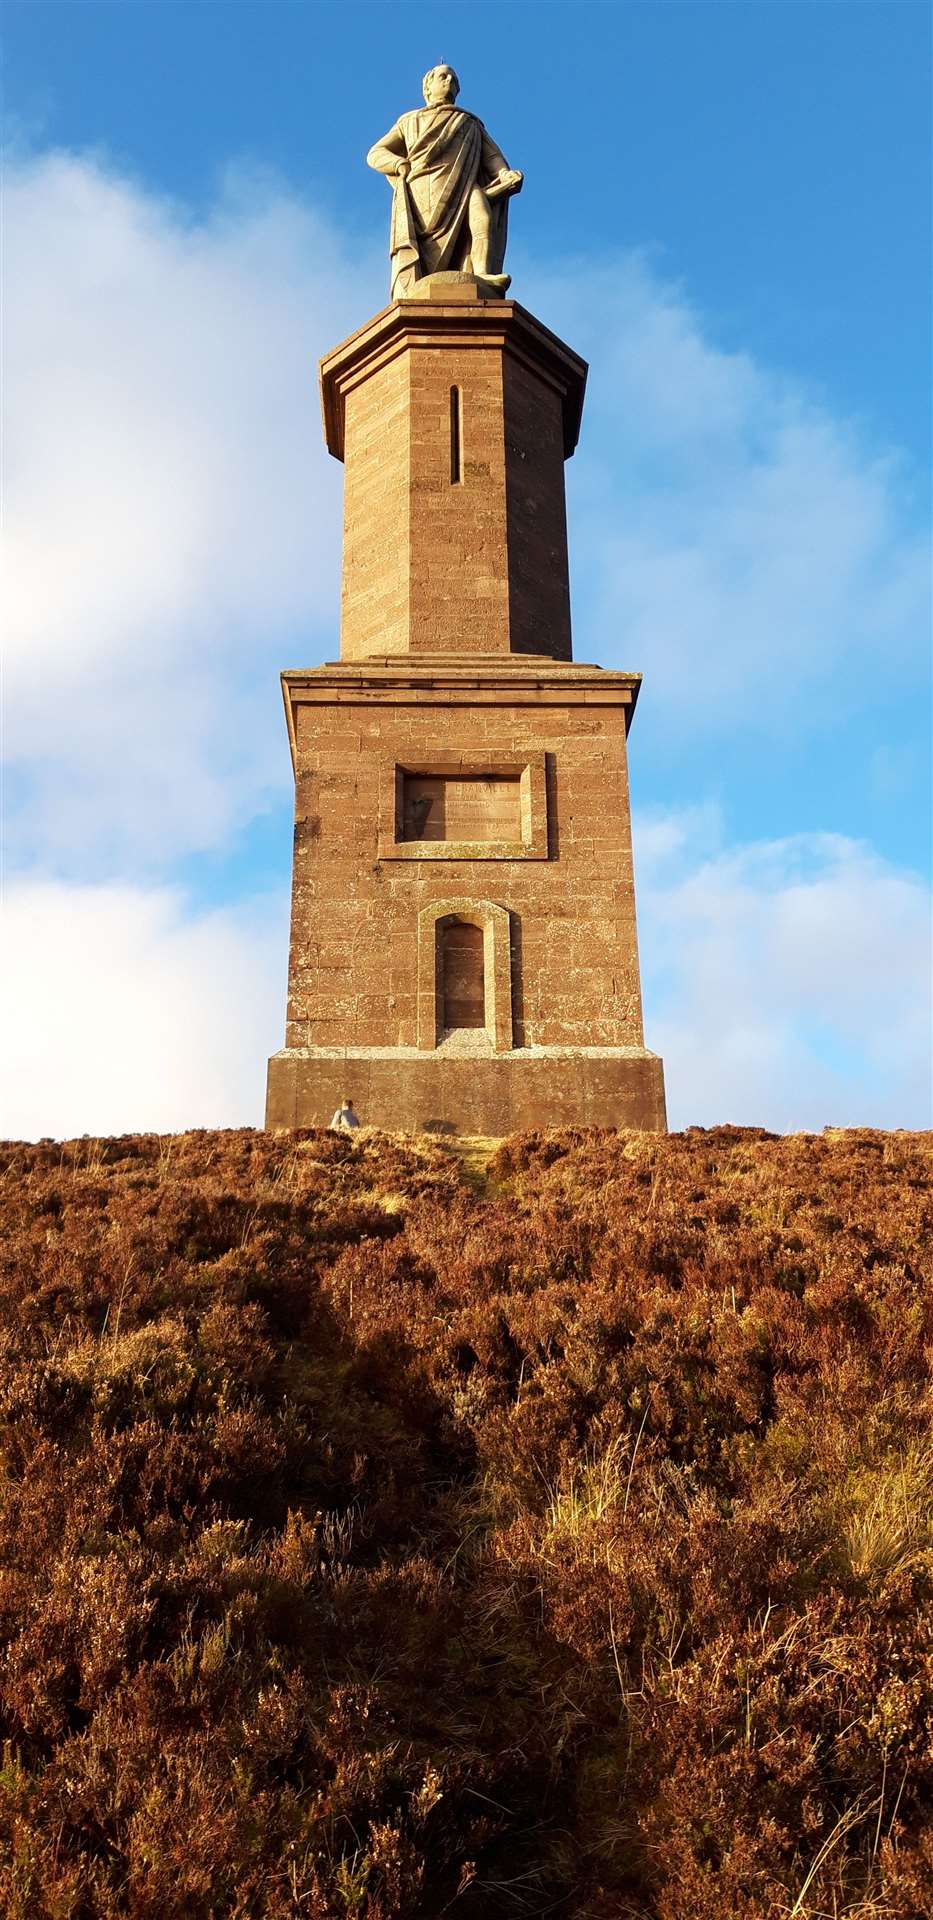 The Duke of Sutherland's statue stands at the top of Ben Bhraggie, Golspie.